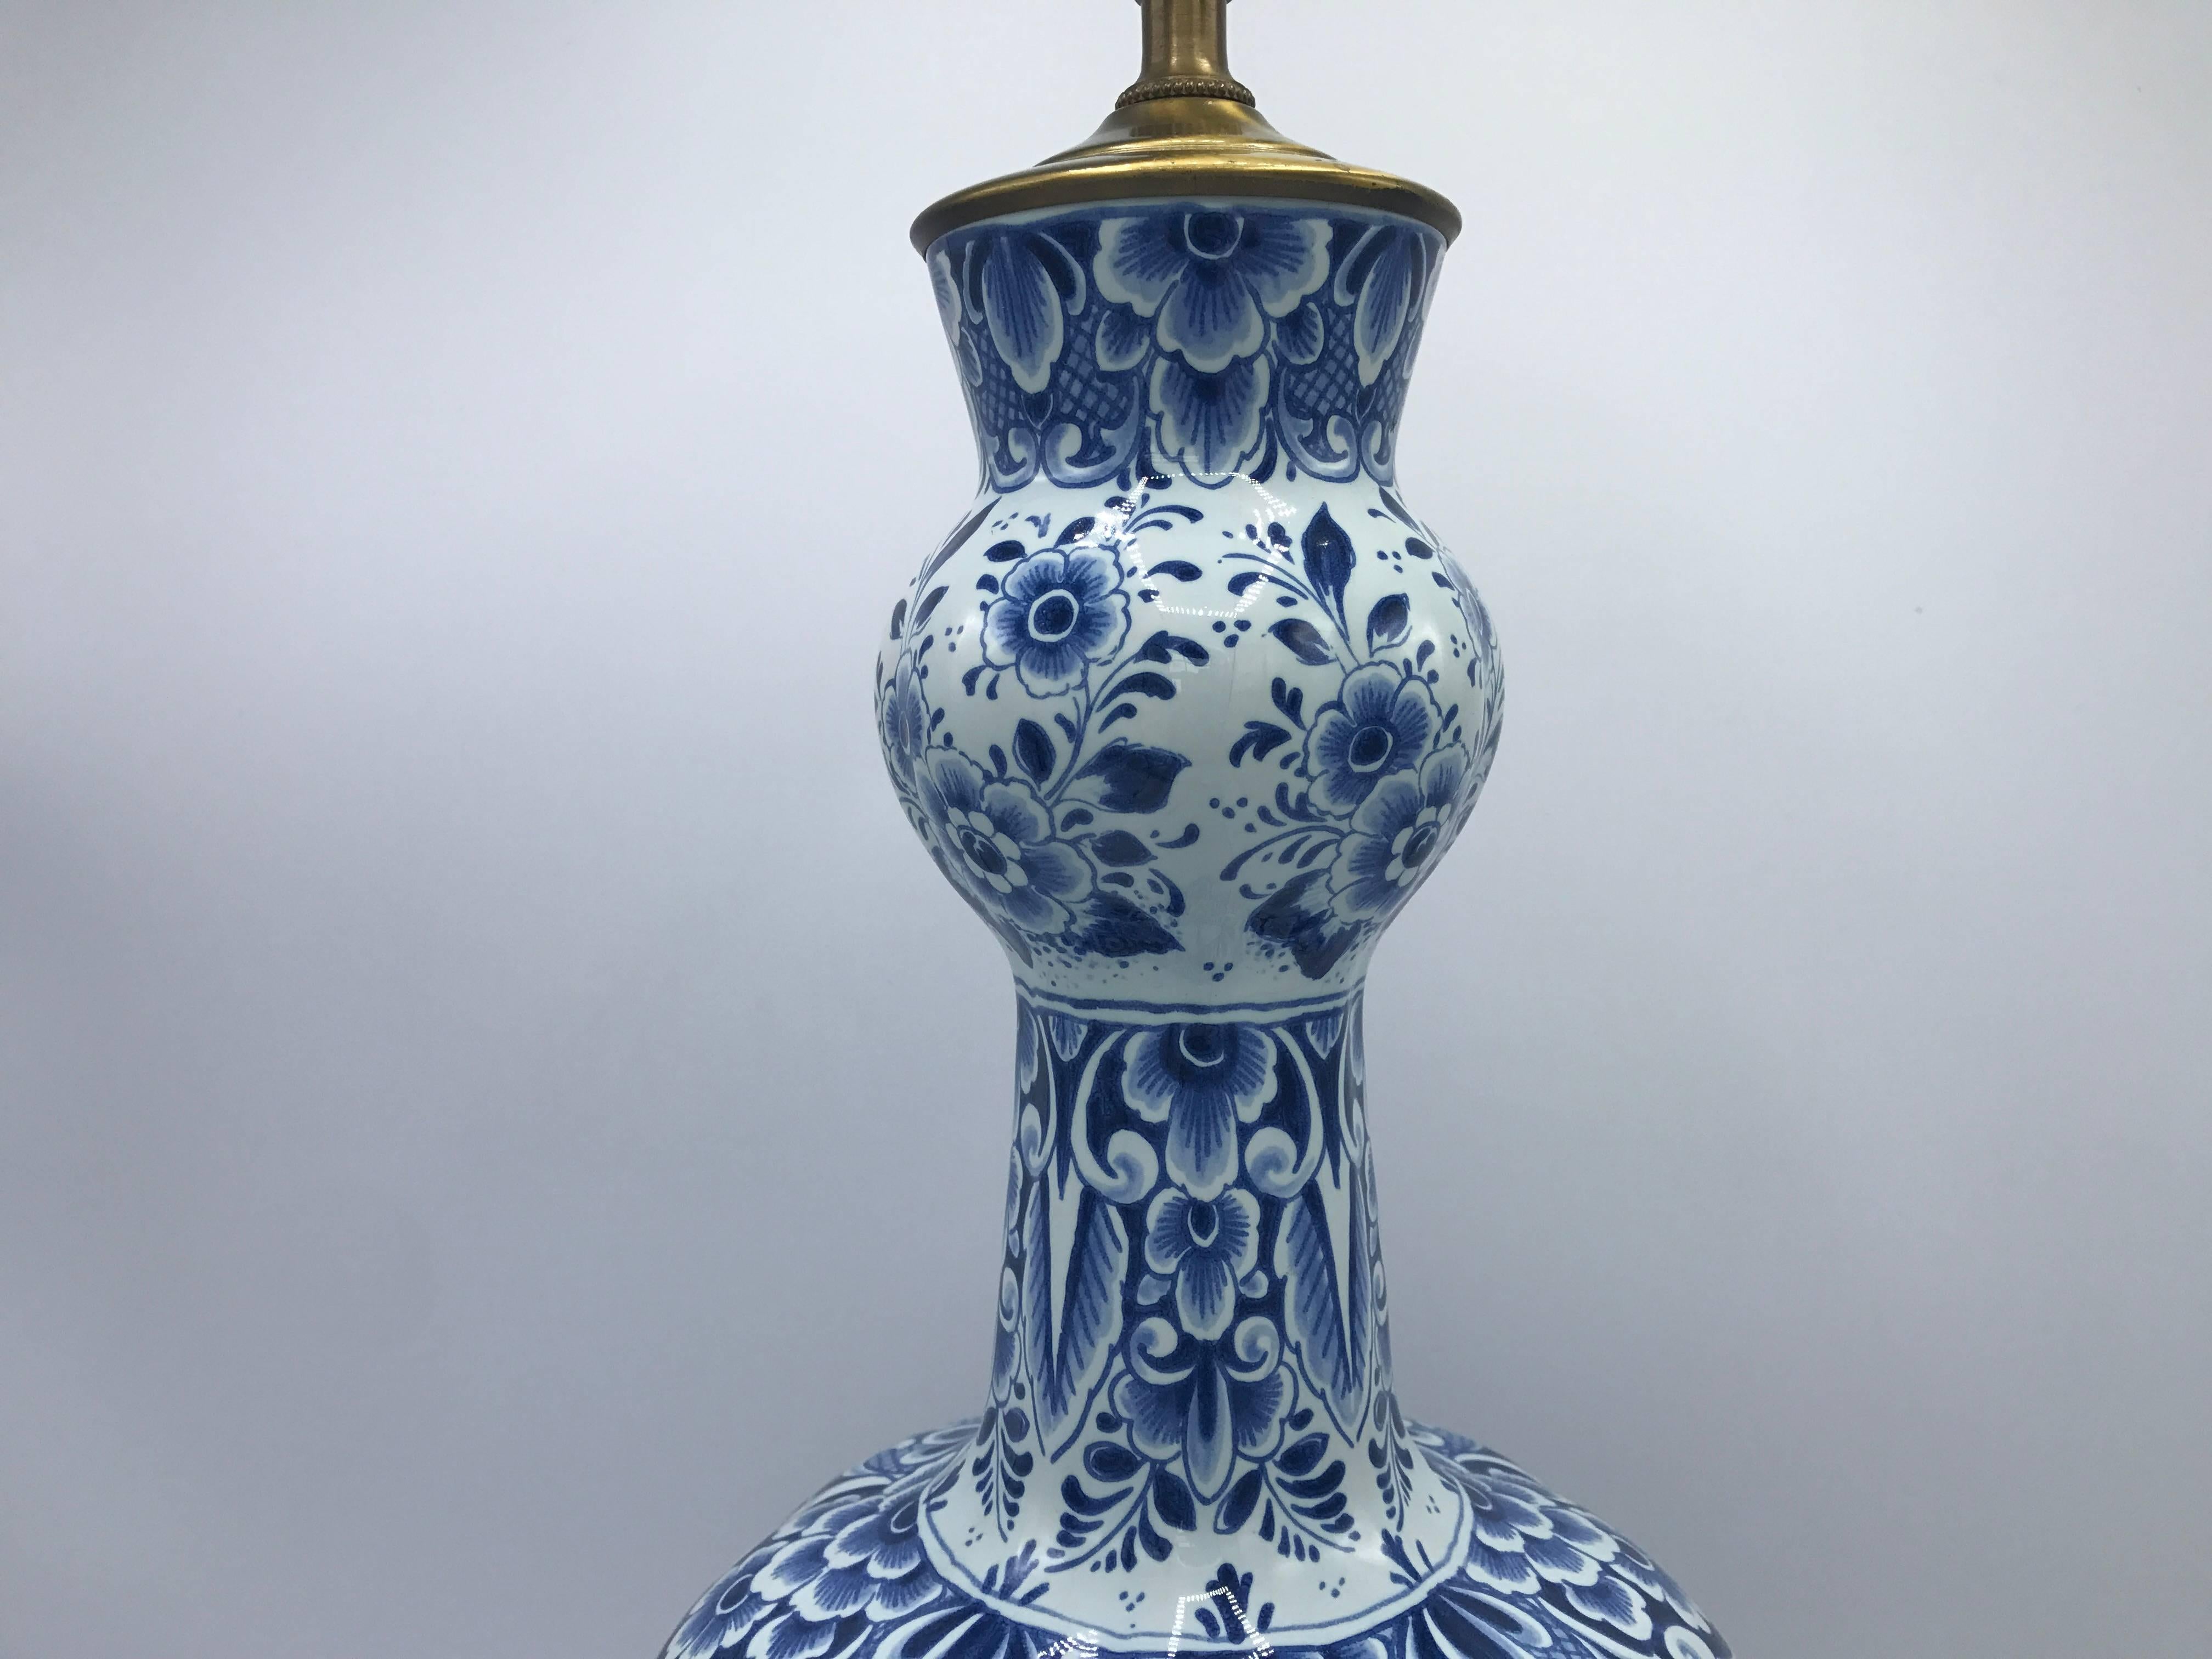 19th Century Delft Vase Lamp with a Blue and White Floral Motif on Brass Base 1